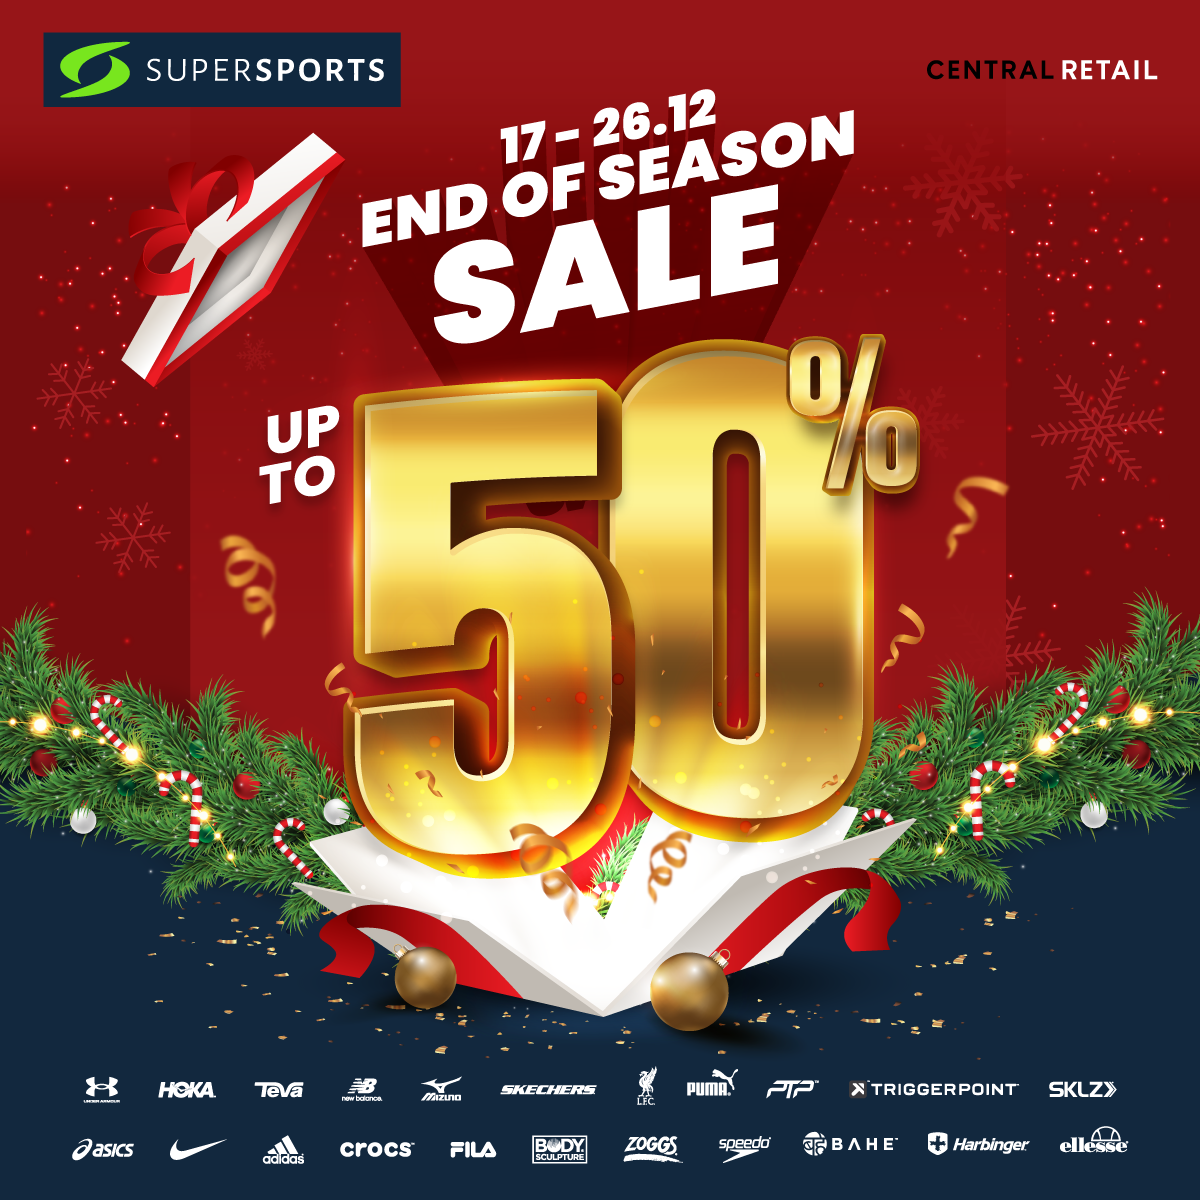 SUPER SALE AT THE END OF THE YEAR: UP TO 50% OFF MANY HOT PRODUCTS AT SUPERSPORTS